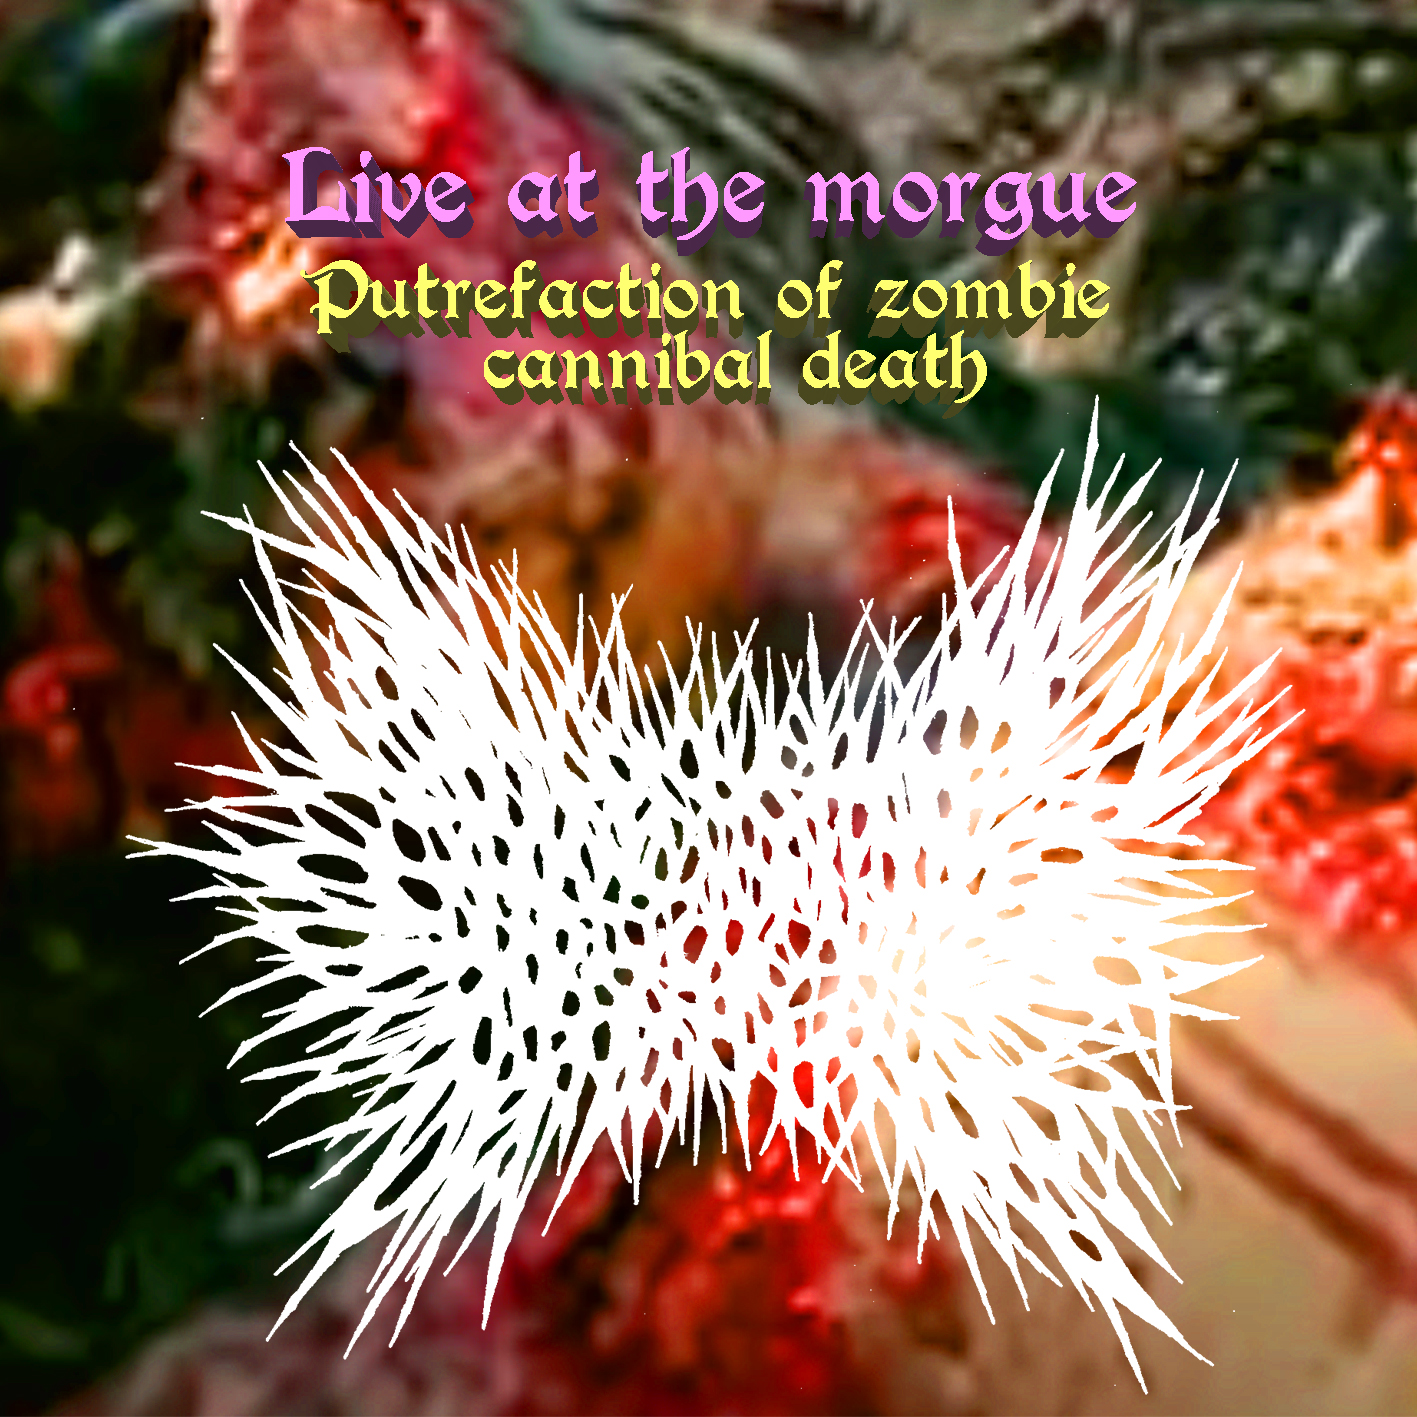 Putrefaction of zombie cannibal death - Live at the morgue